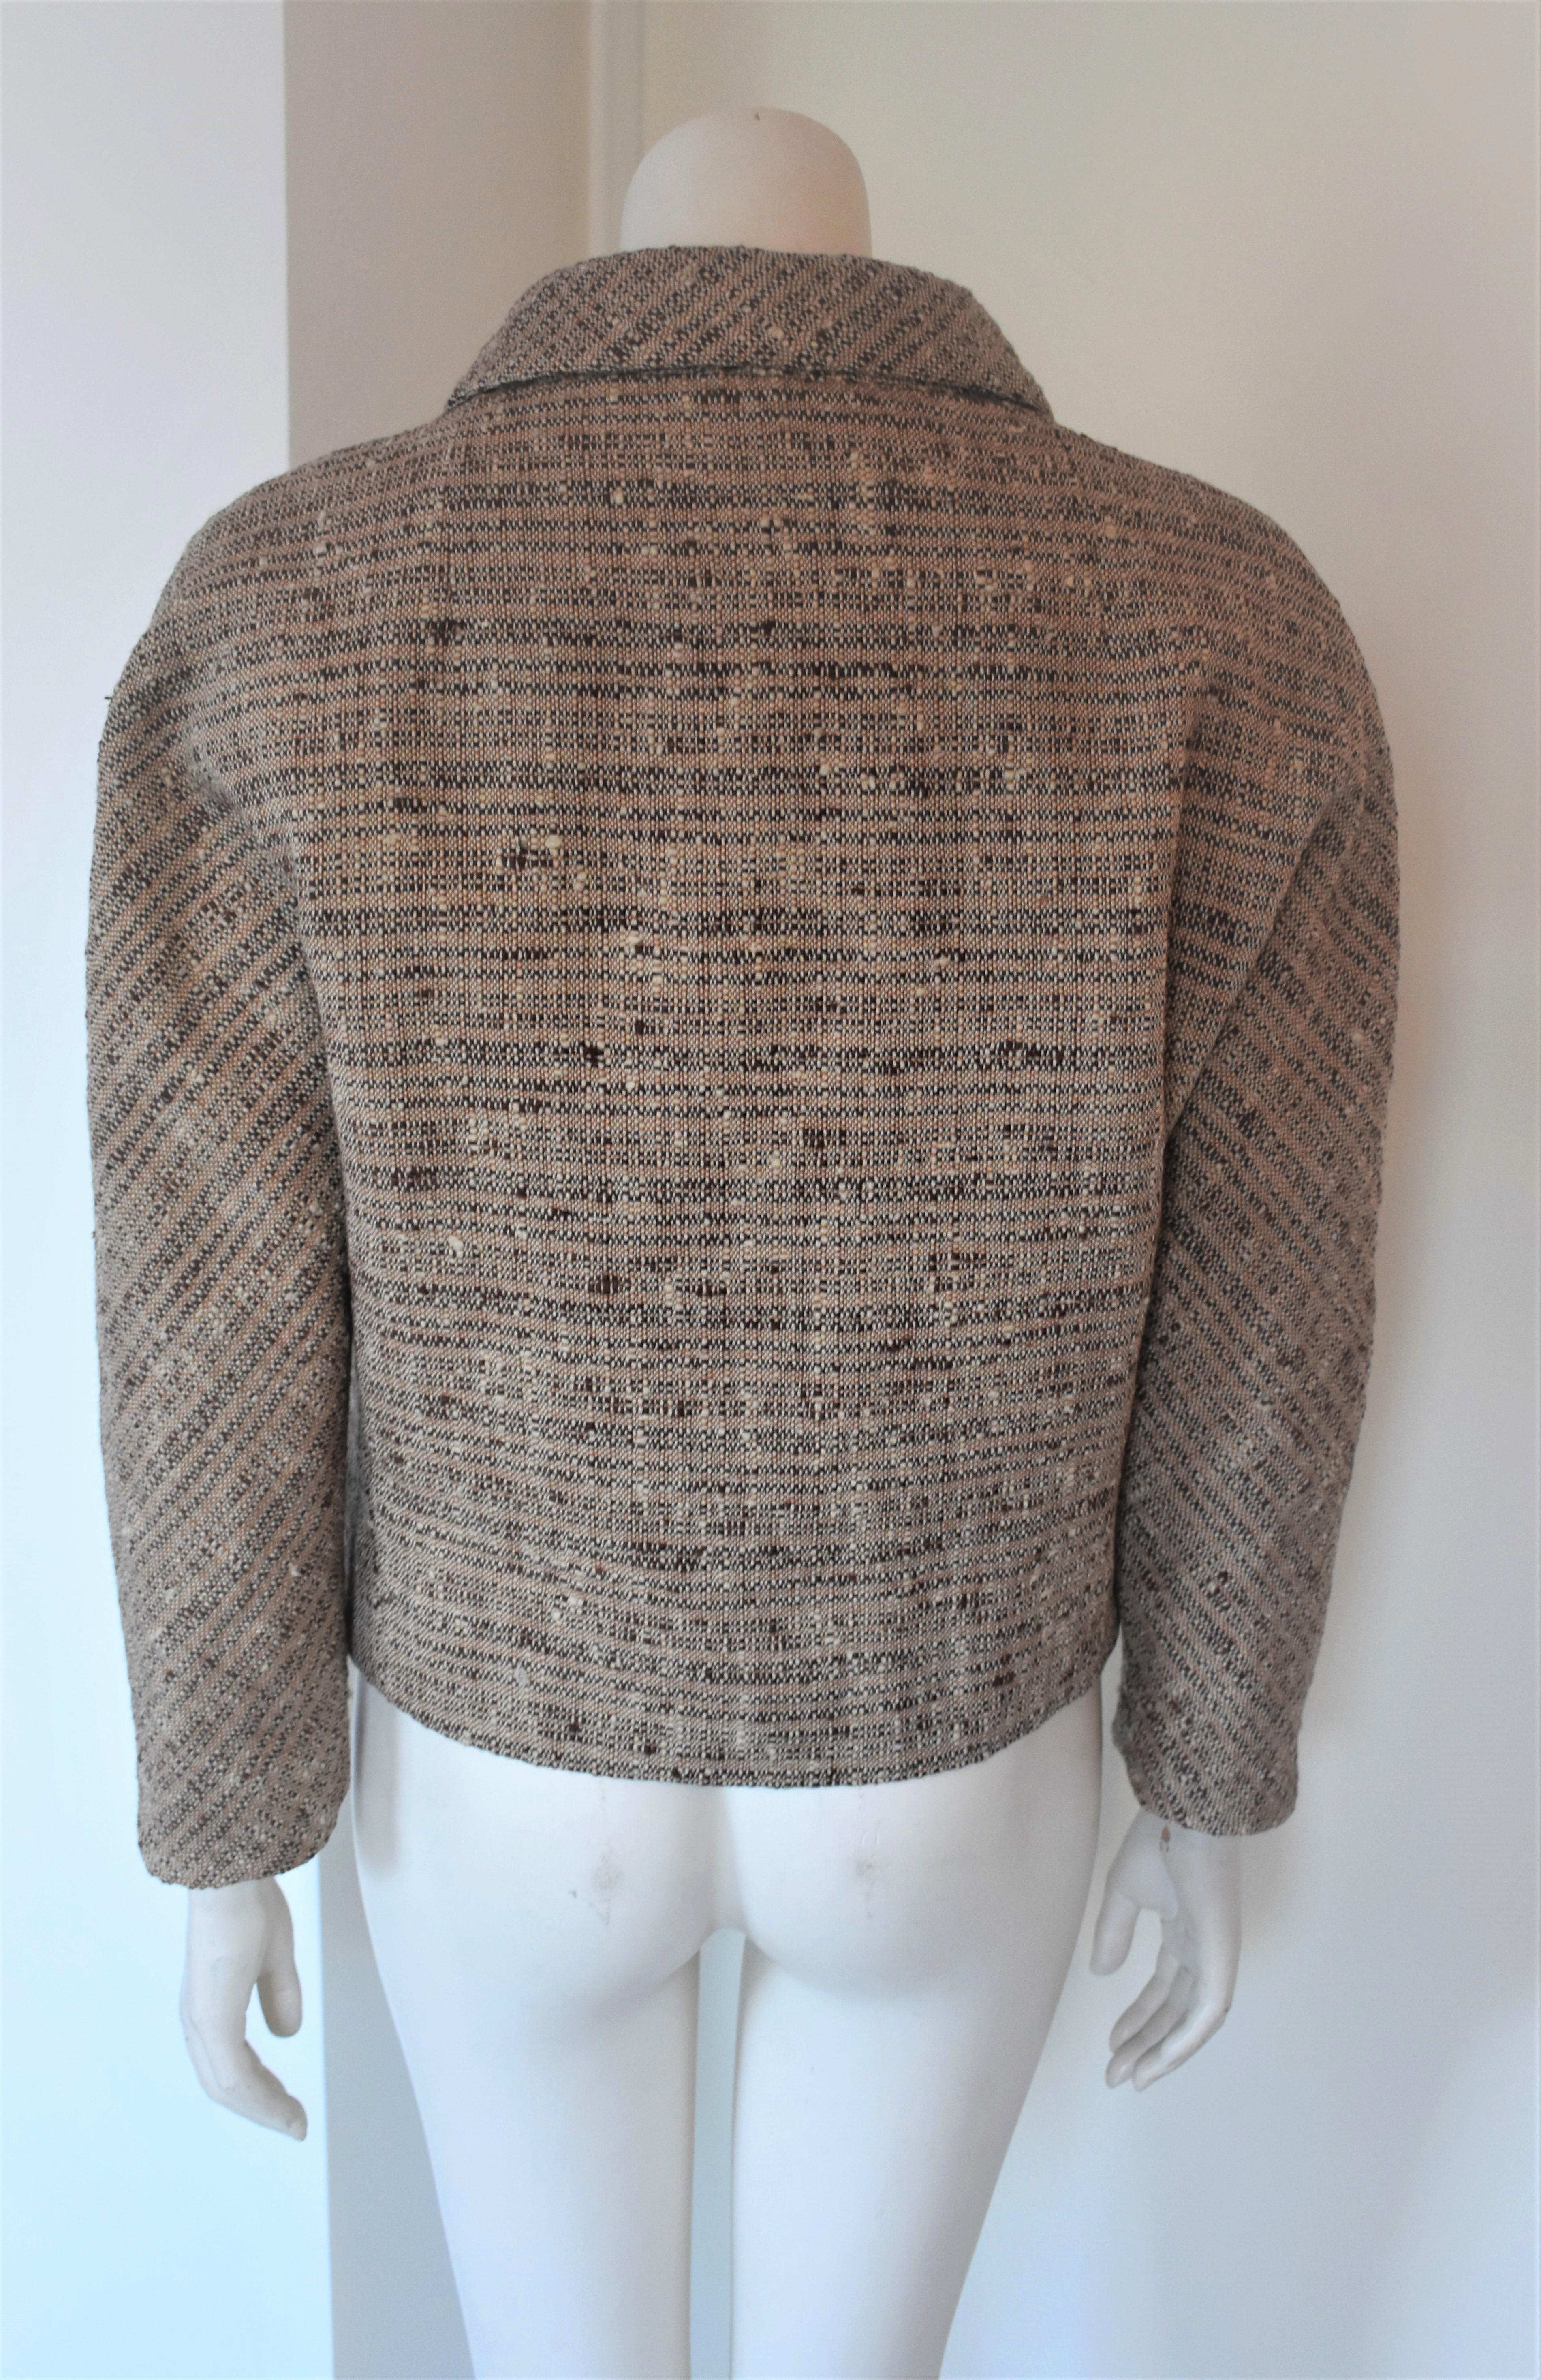 FINAL SALE Givenchy Haute Couture Tweed Jacket Audrey Hepburn Style, Circa 1958 For Sale 1